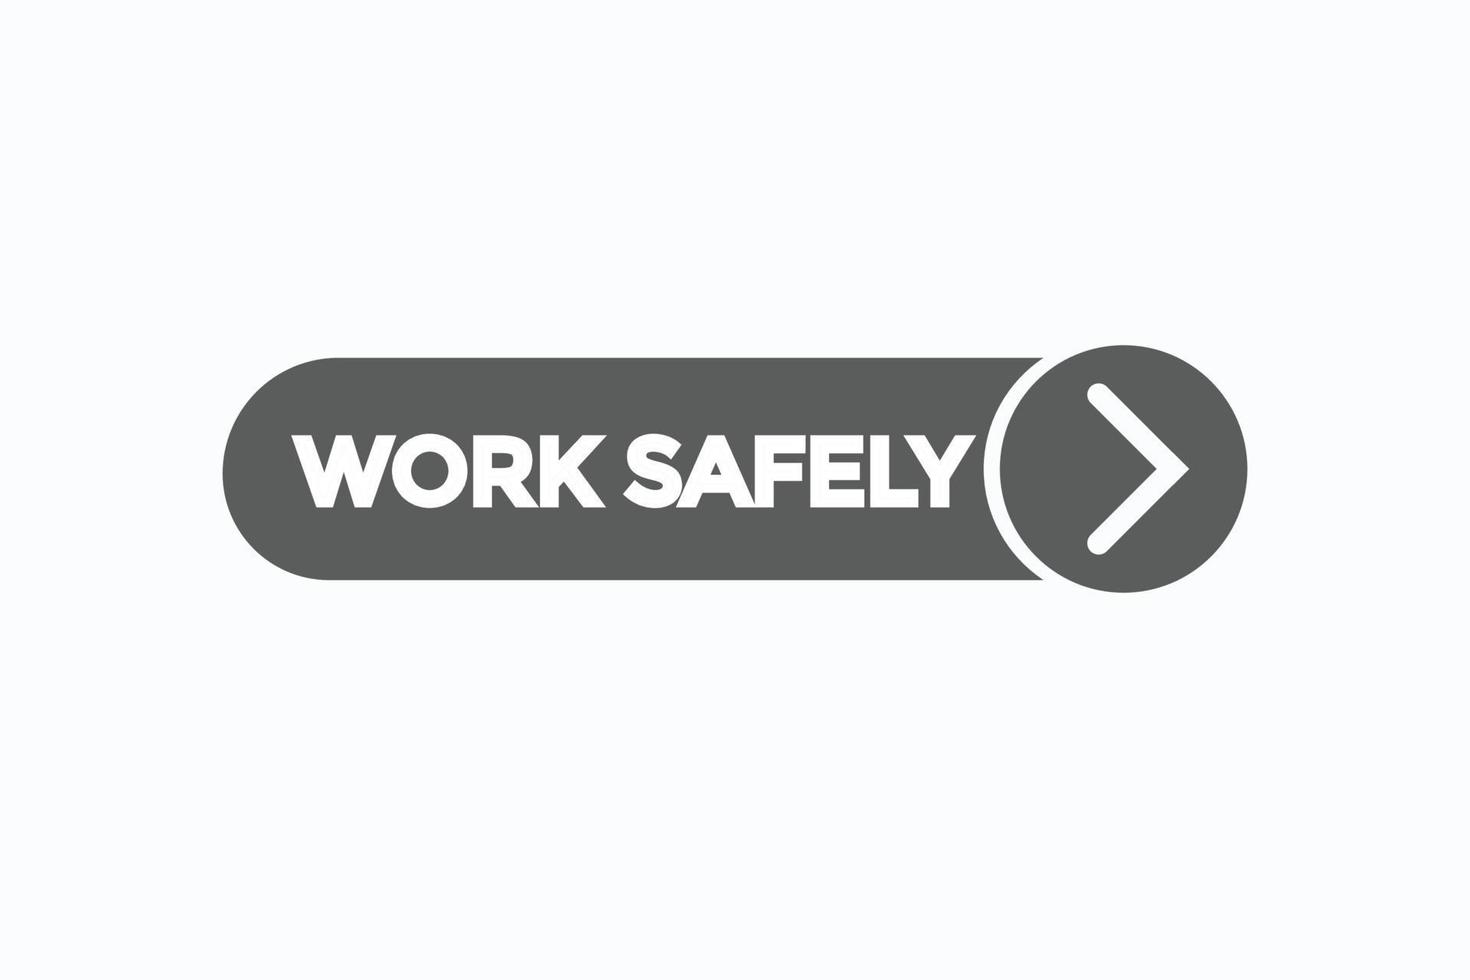 work safely button vectors.sign label speech bubble work safely vector